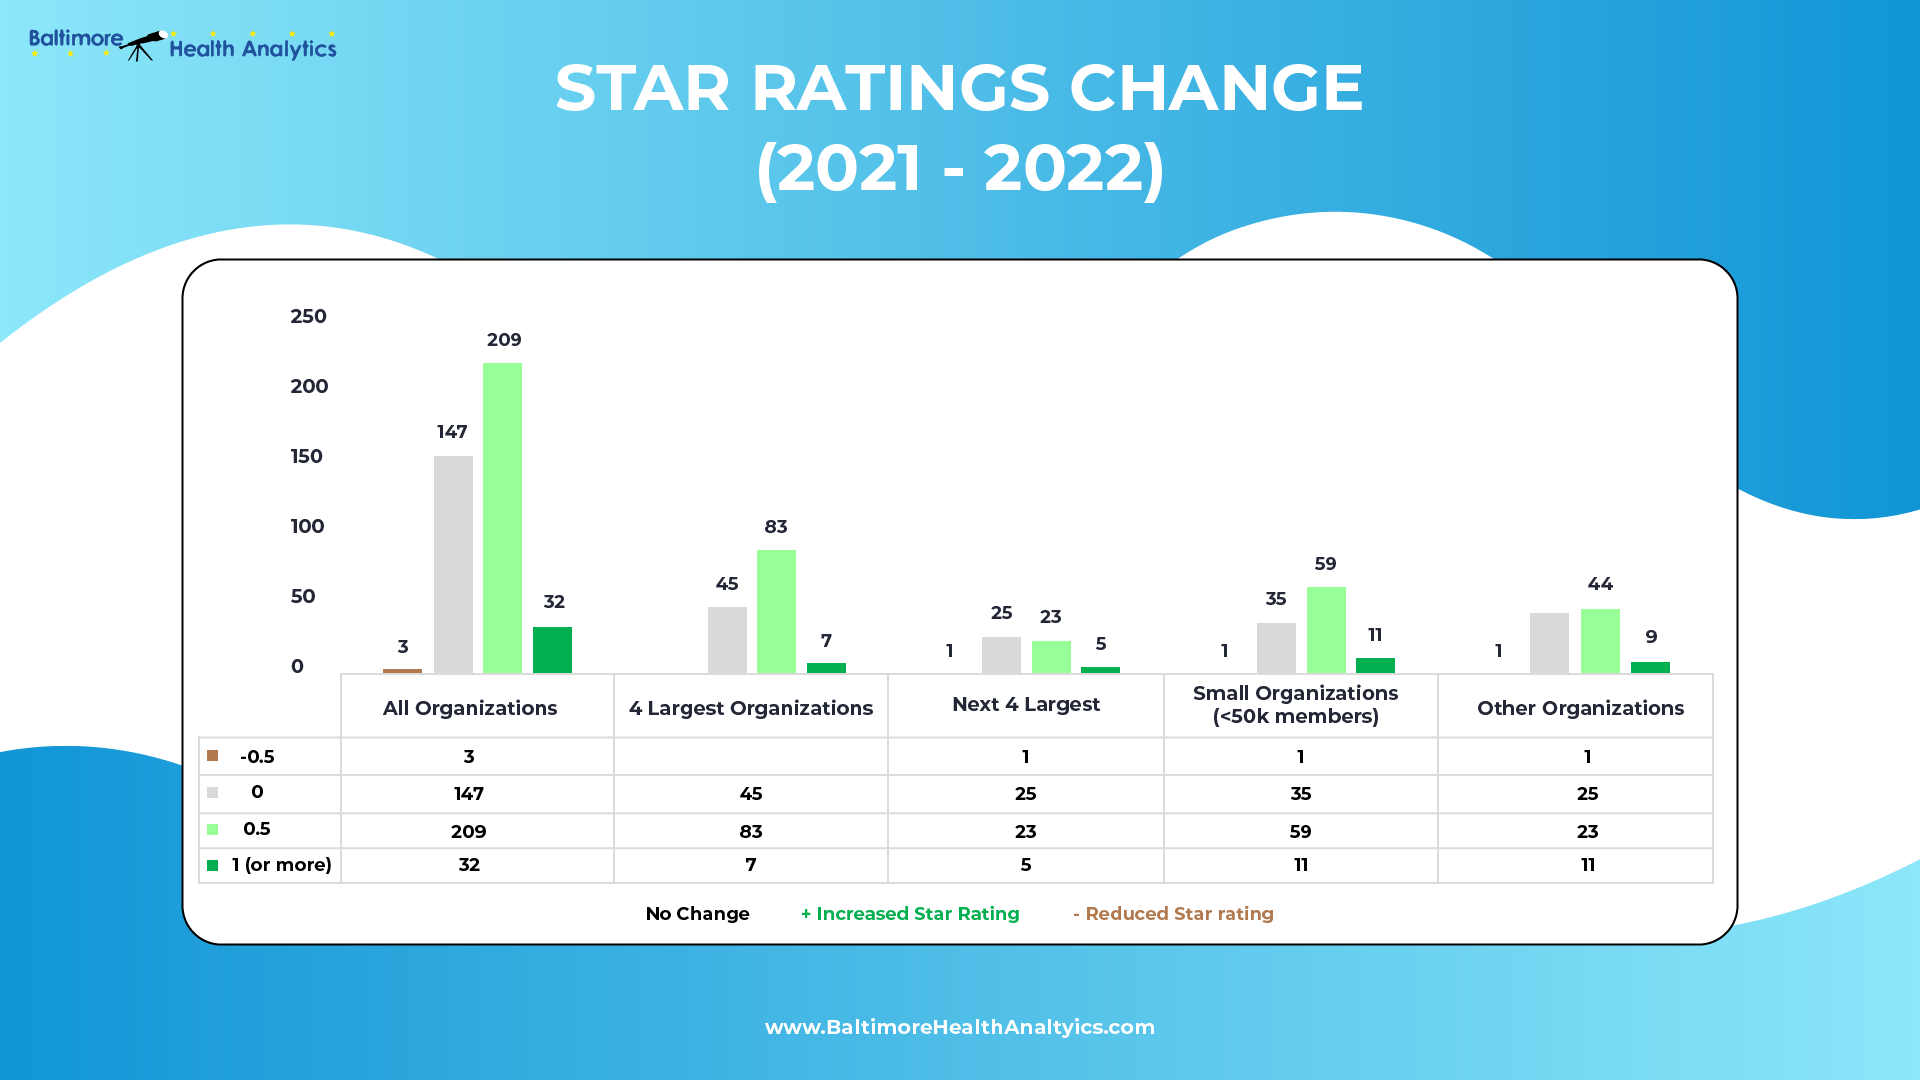 Medicare Advantage Plans Year Over Year Star Ratings by Size